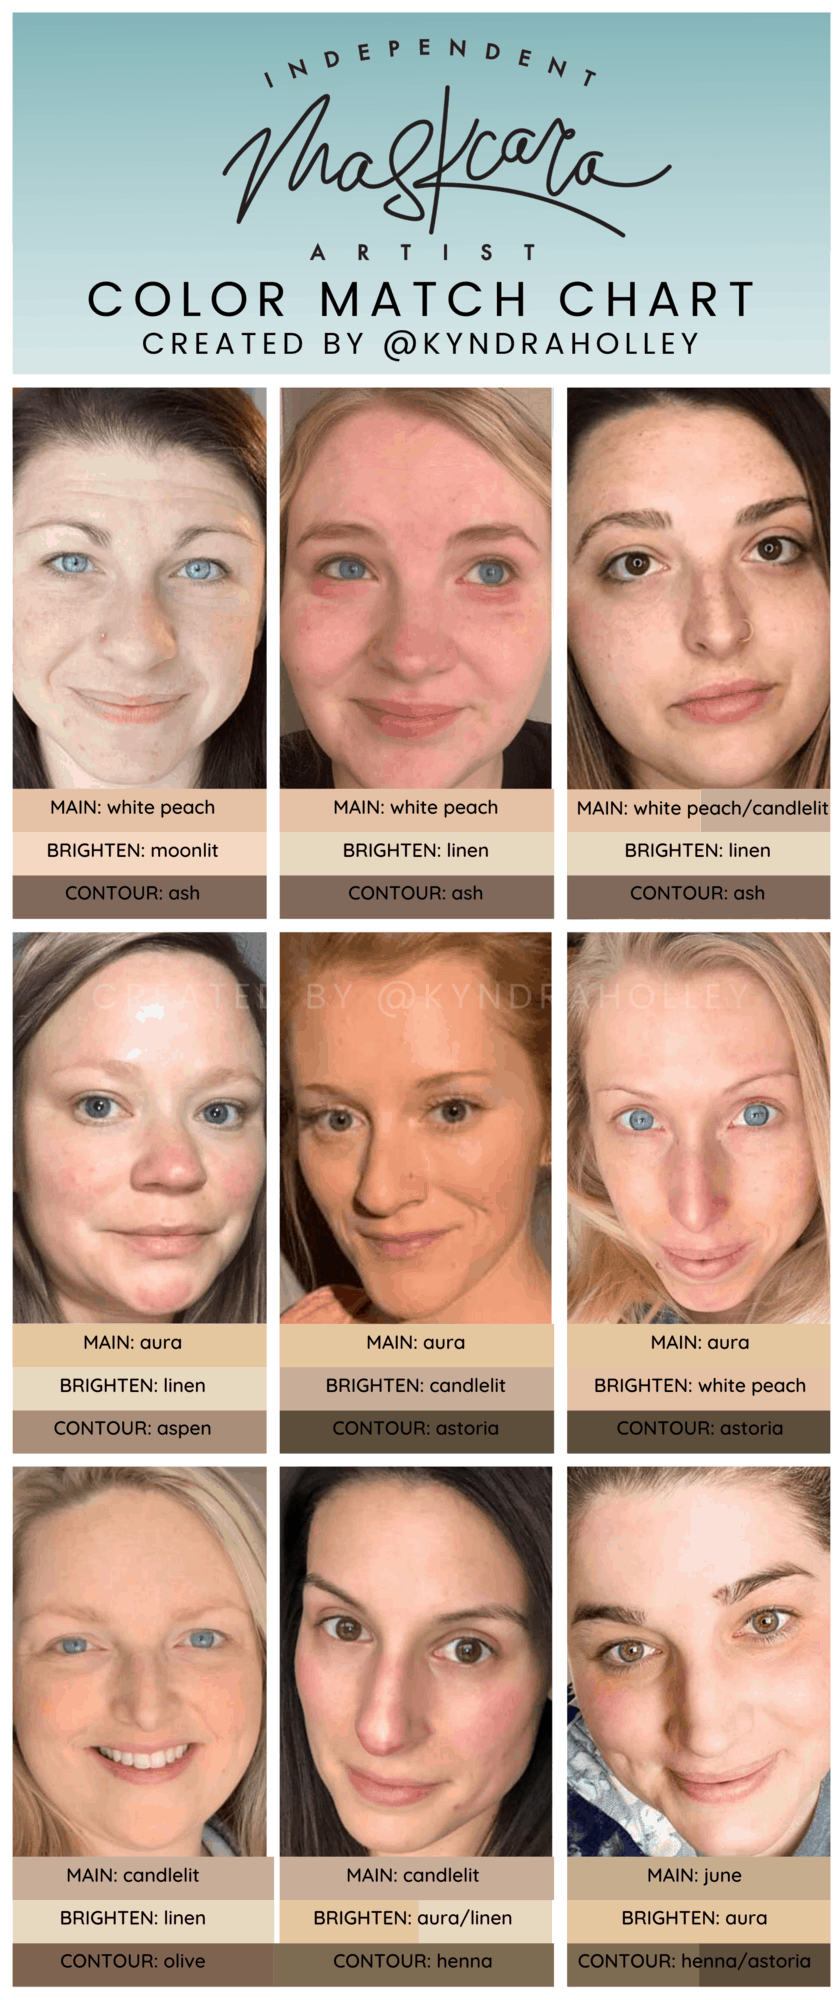 A portrait orientation graphic with a light teal ombre fade. At the top of the image, the text reads "Independent Maskcara Artist." Within the image are 9 selfies of women with light skin tones and their respective color match.